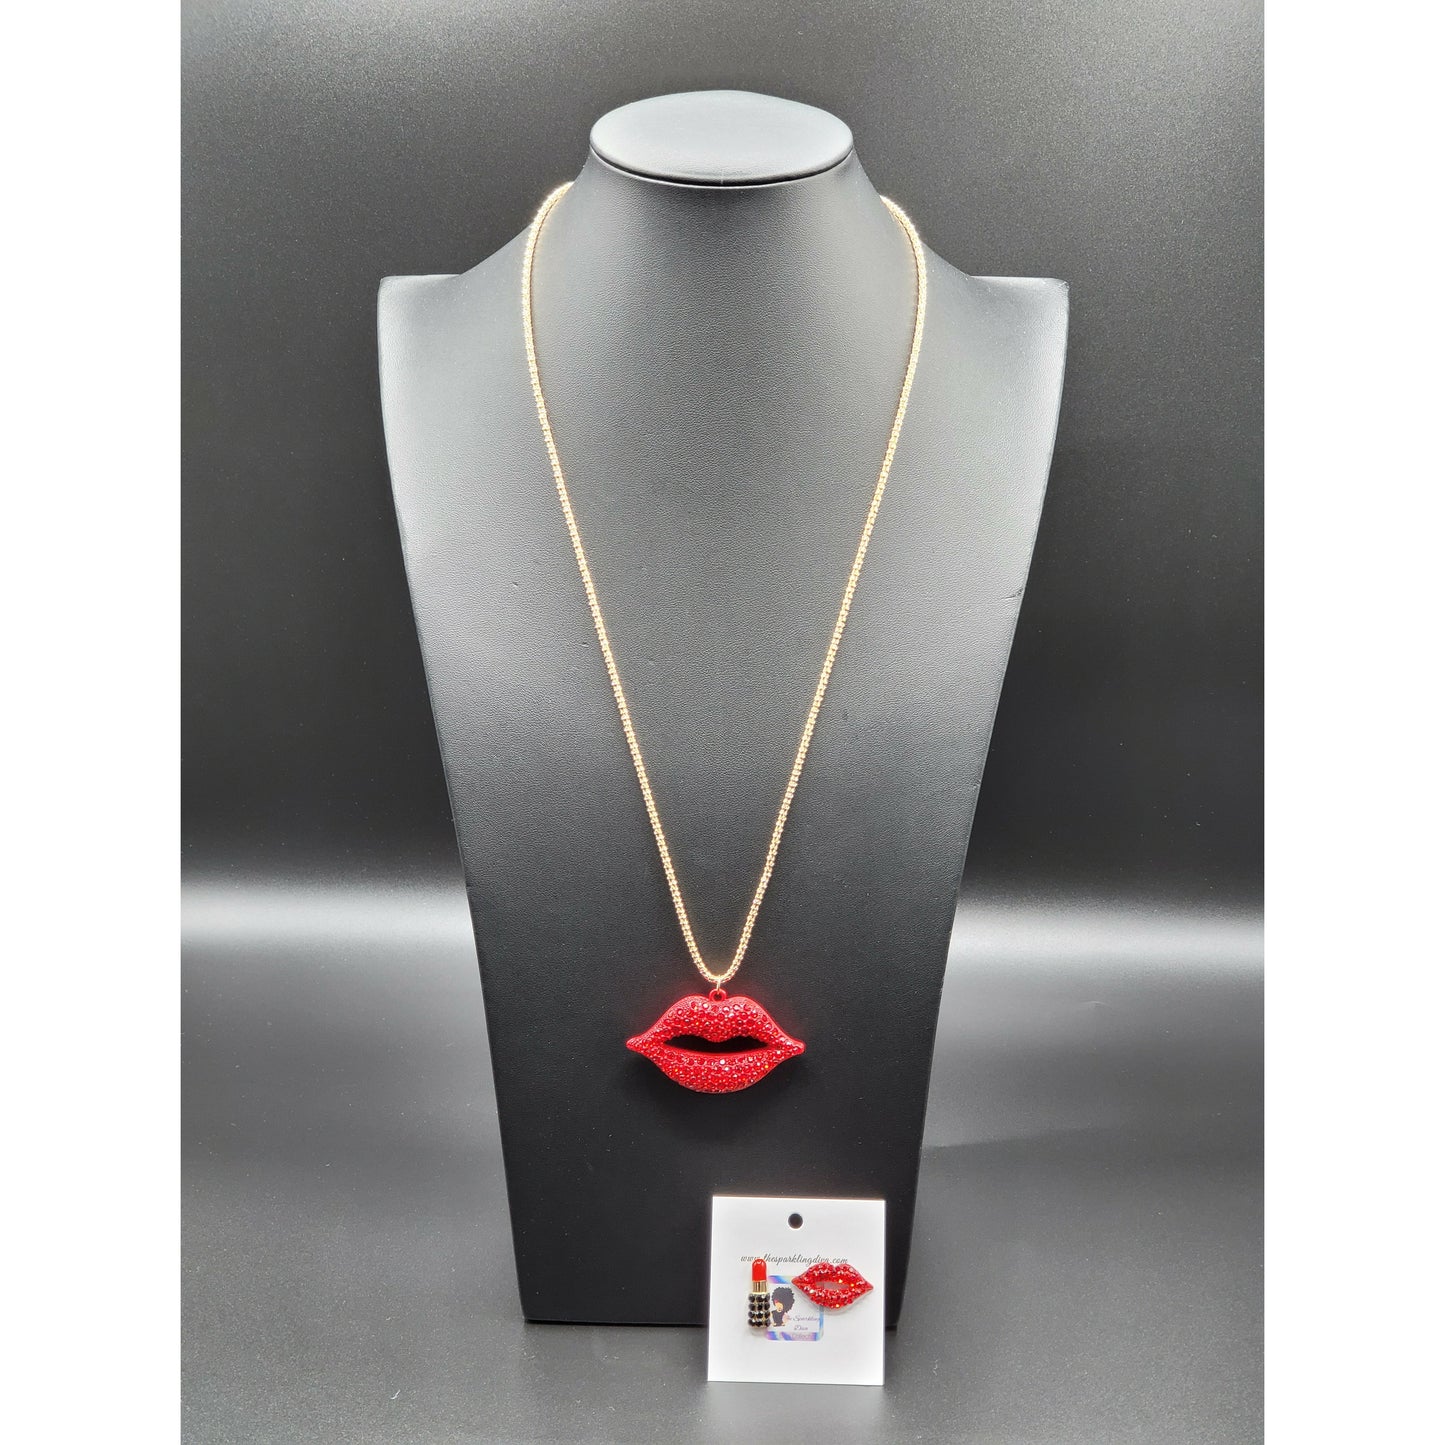 Pucker up necklace